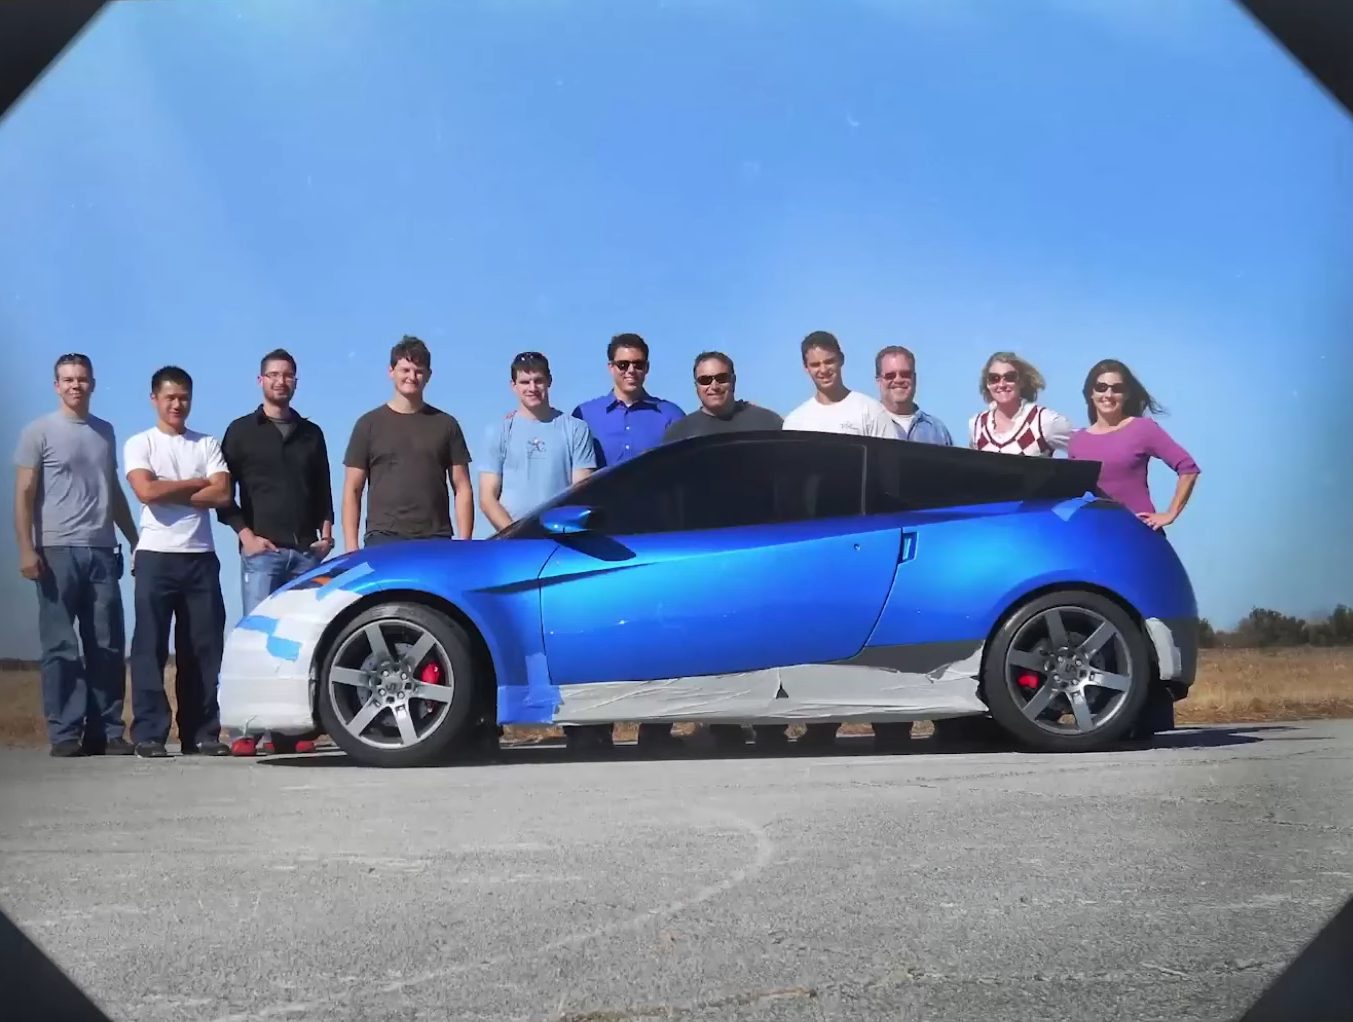 The blue Rivian sports car prototype, shot in profile with employees standing behind it